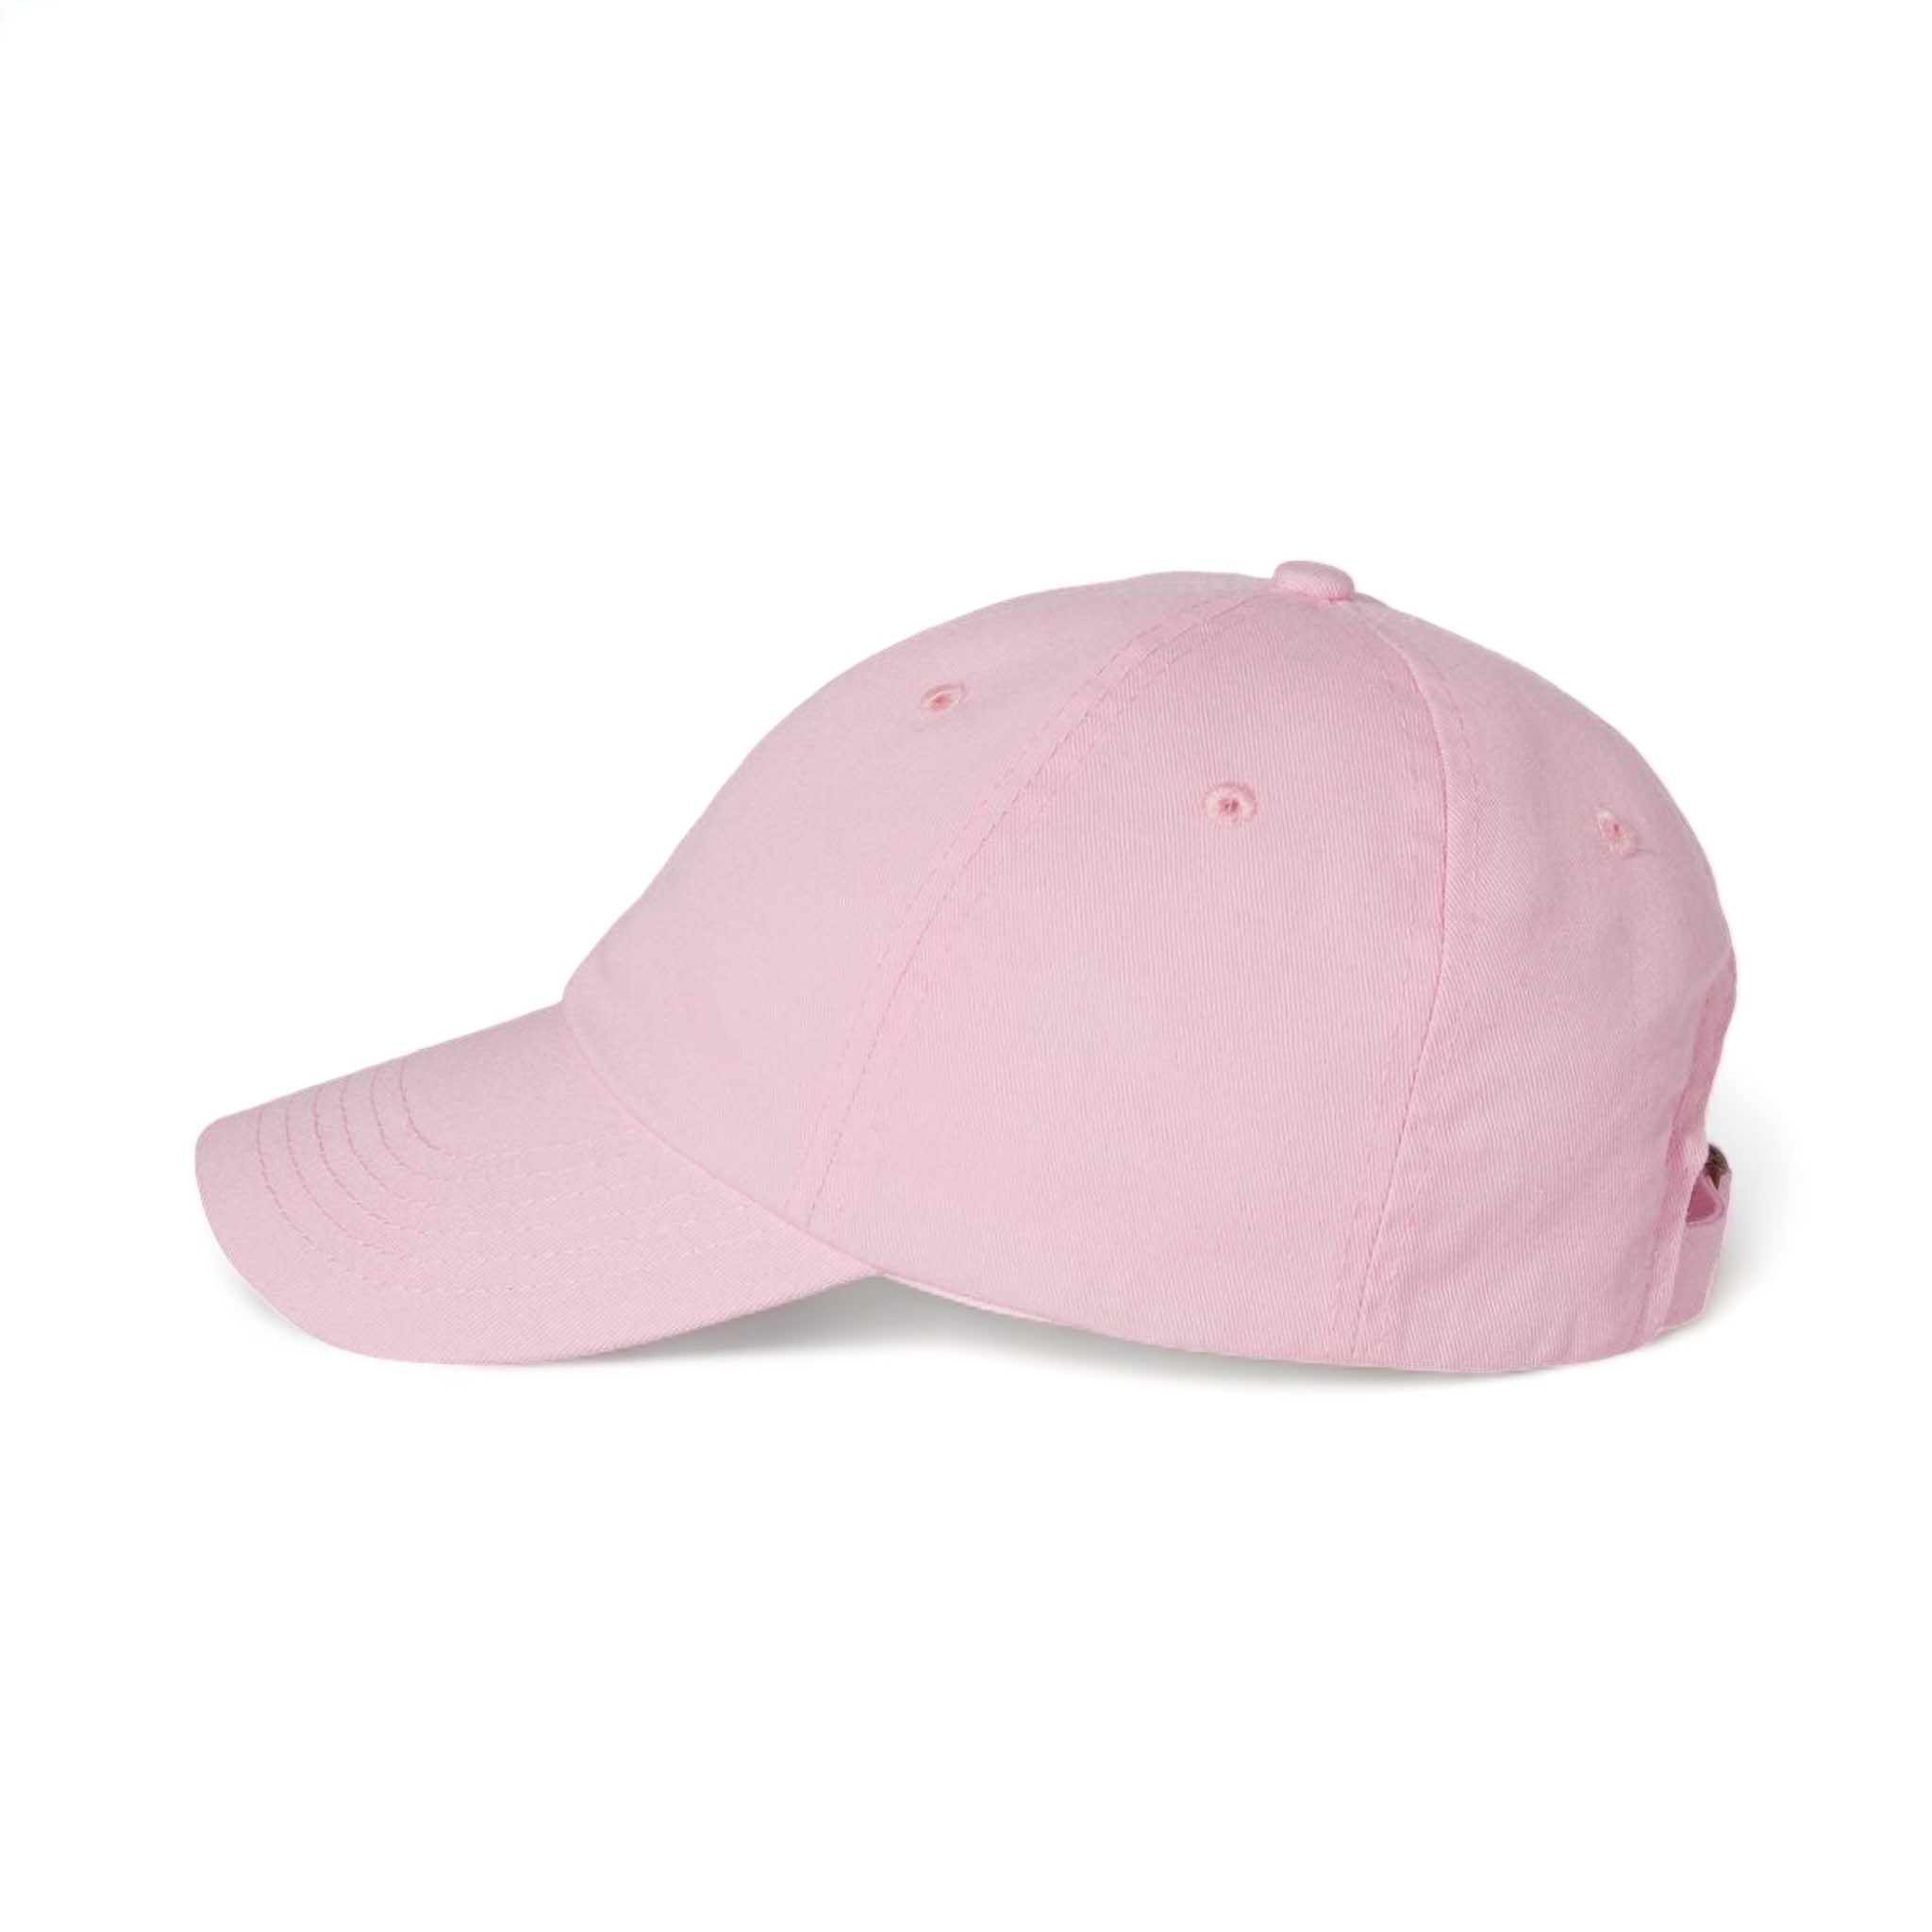 Side view of Valucap VC300A custom hat in light pink